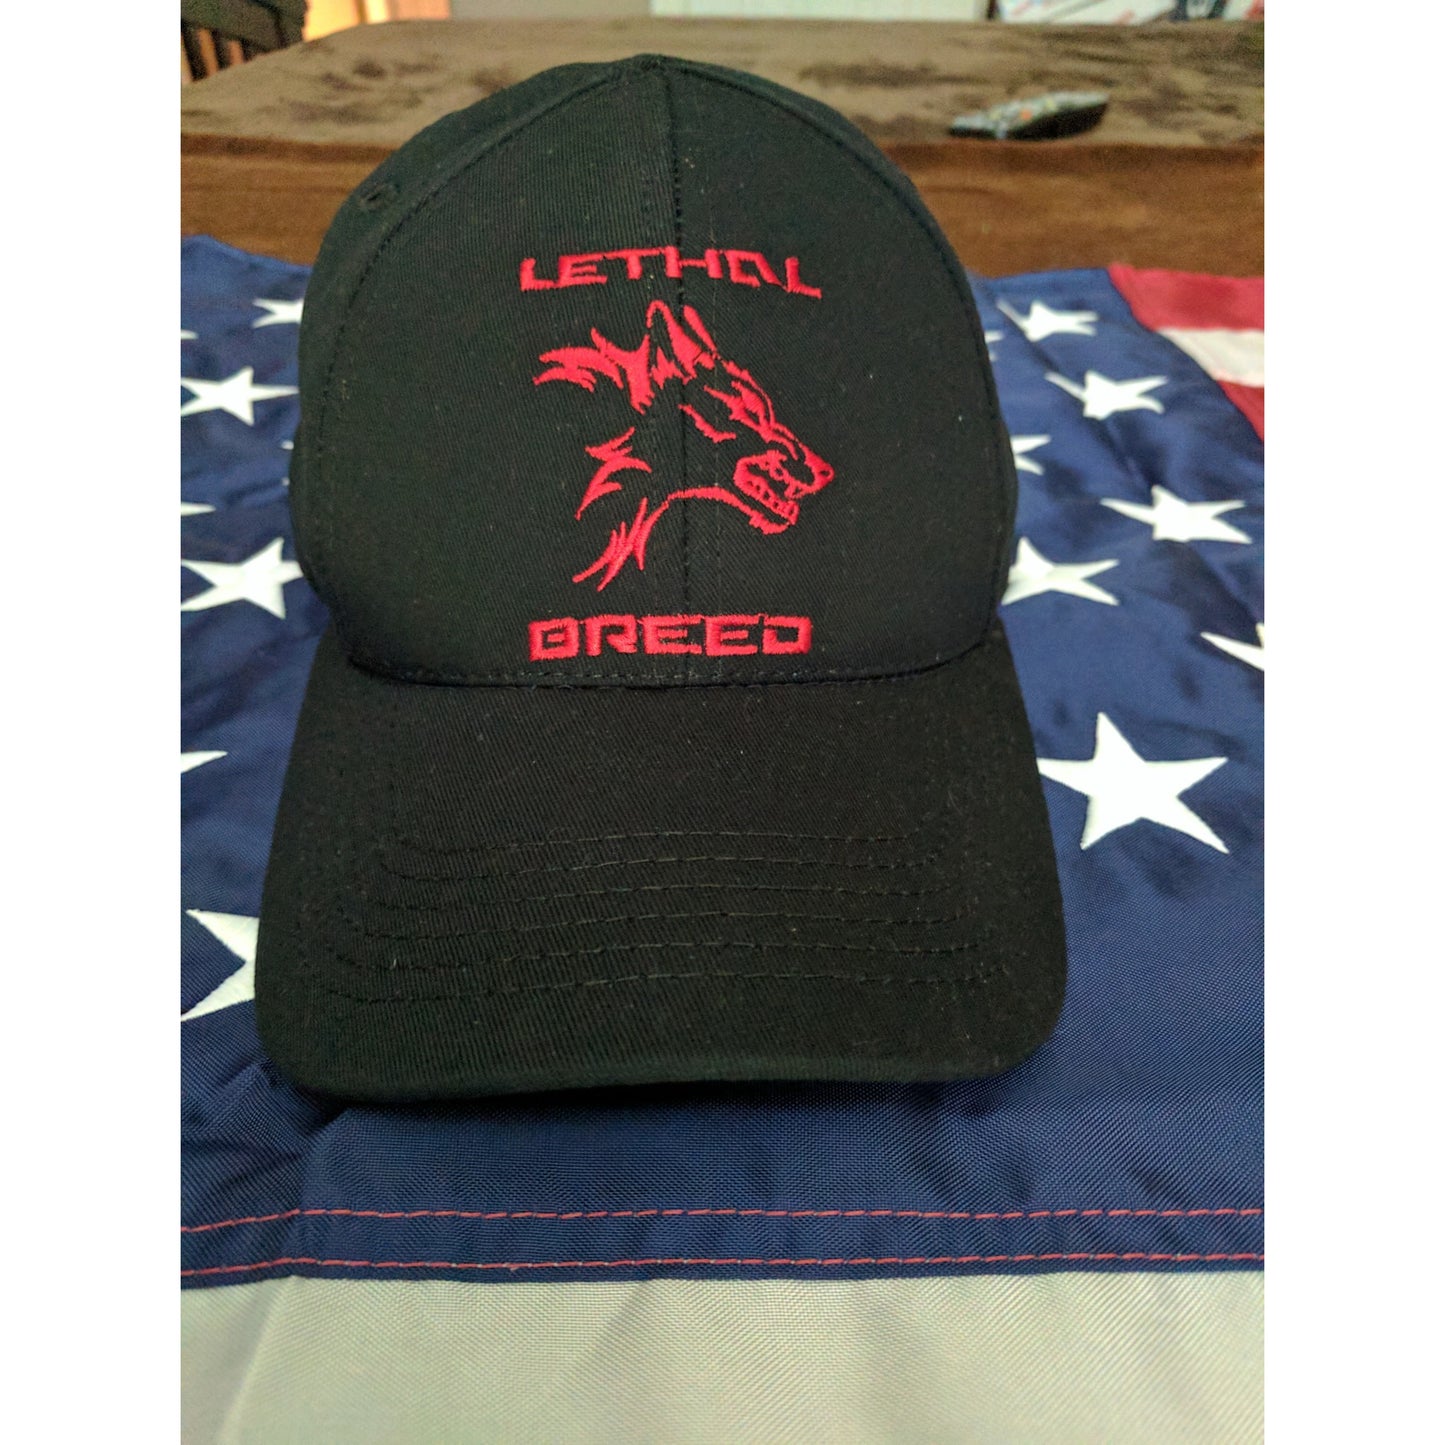 LETHAL BREED EMBROIDERED HAT